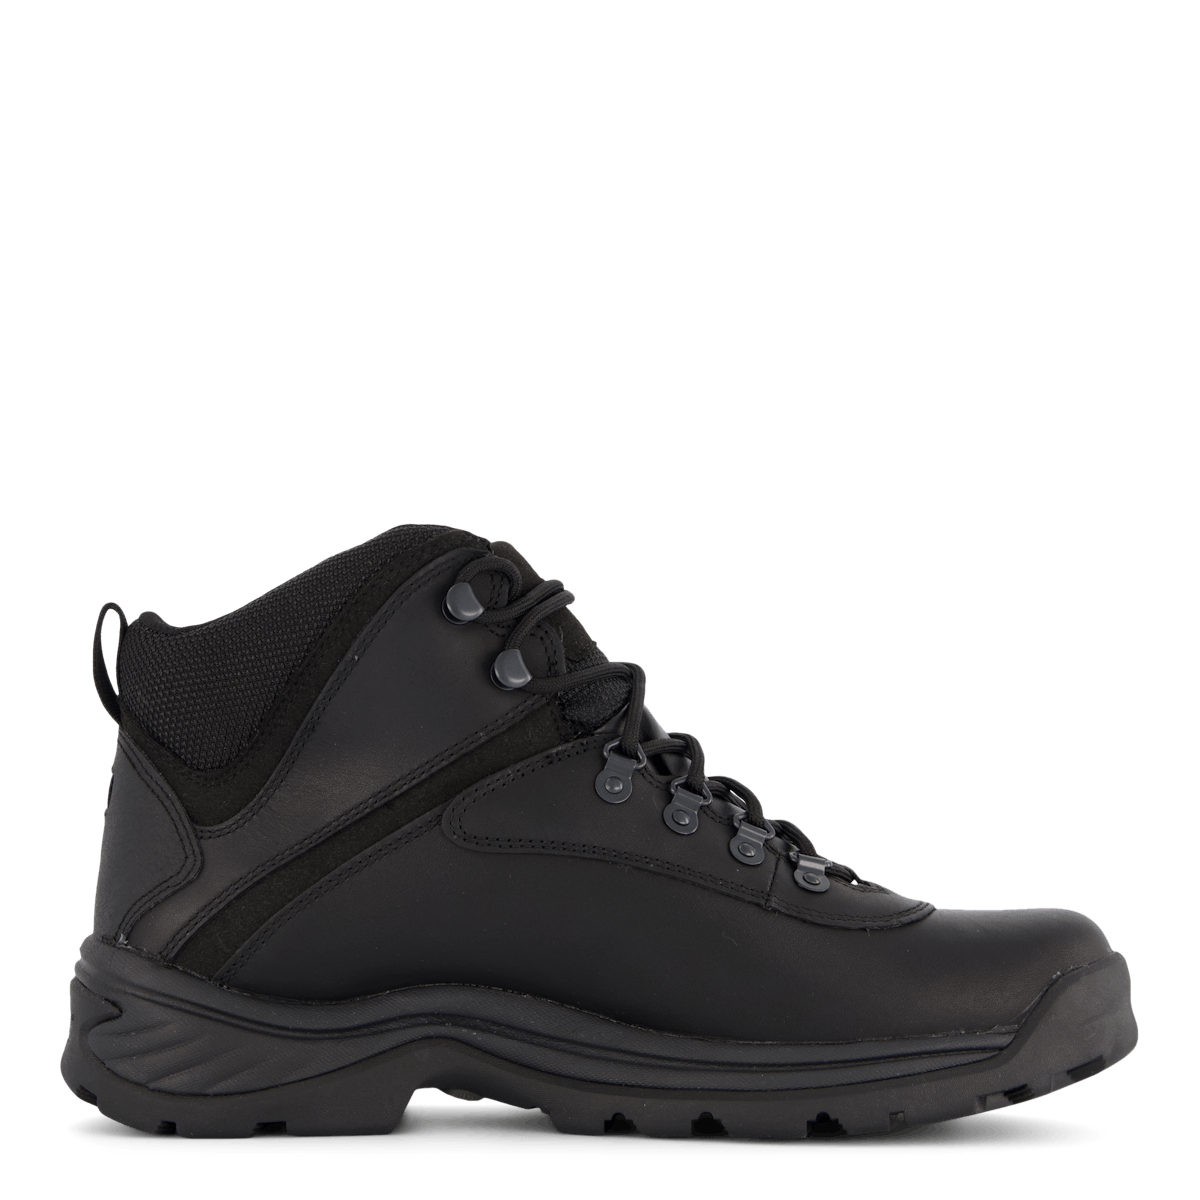 White Ledge Mid Lace Up Waterp Black